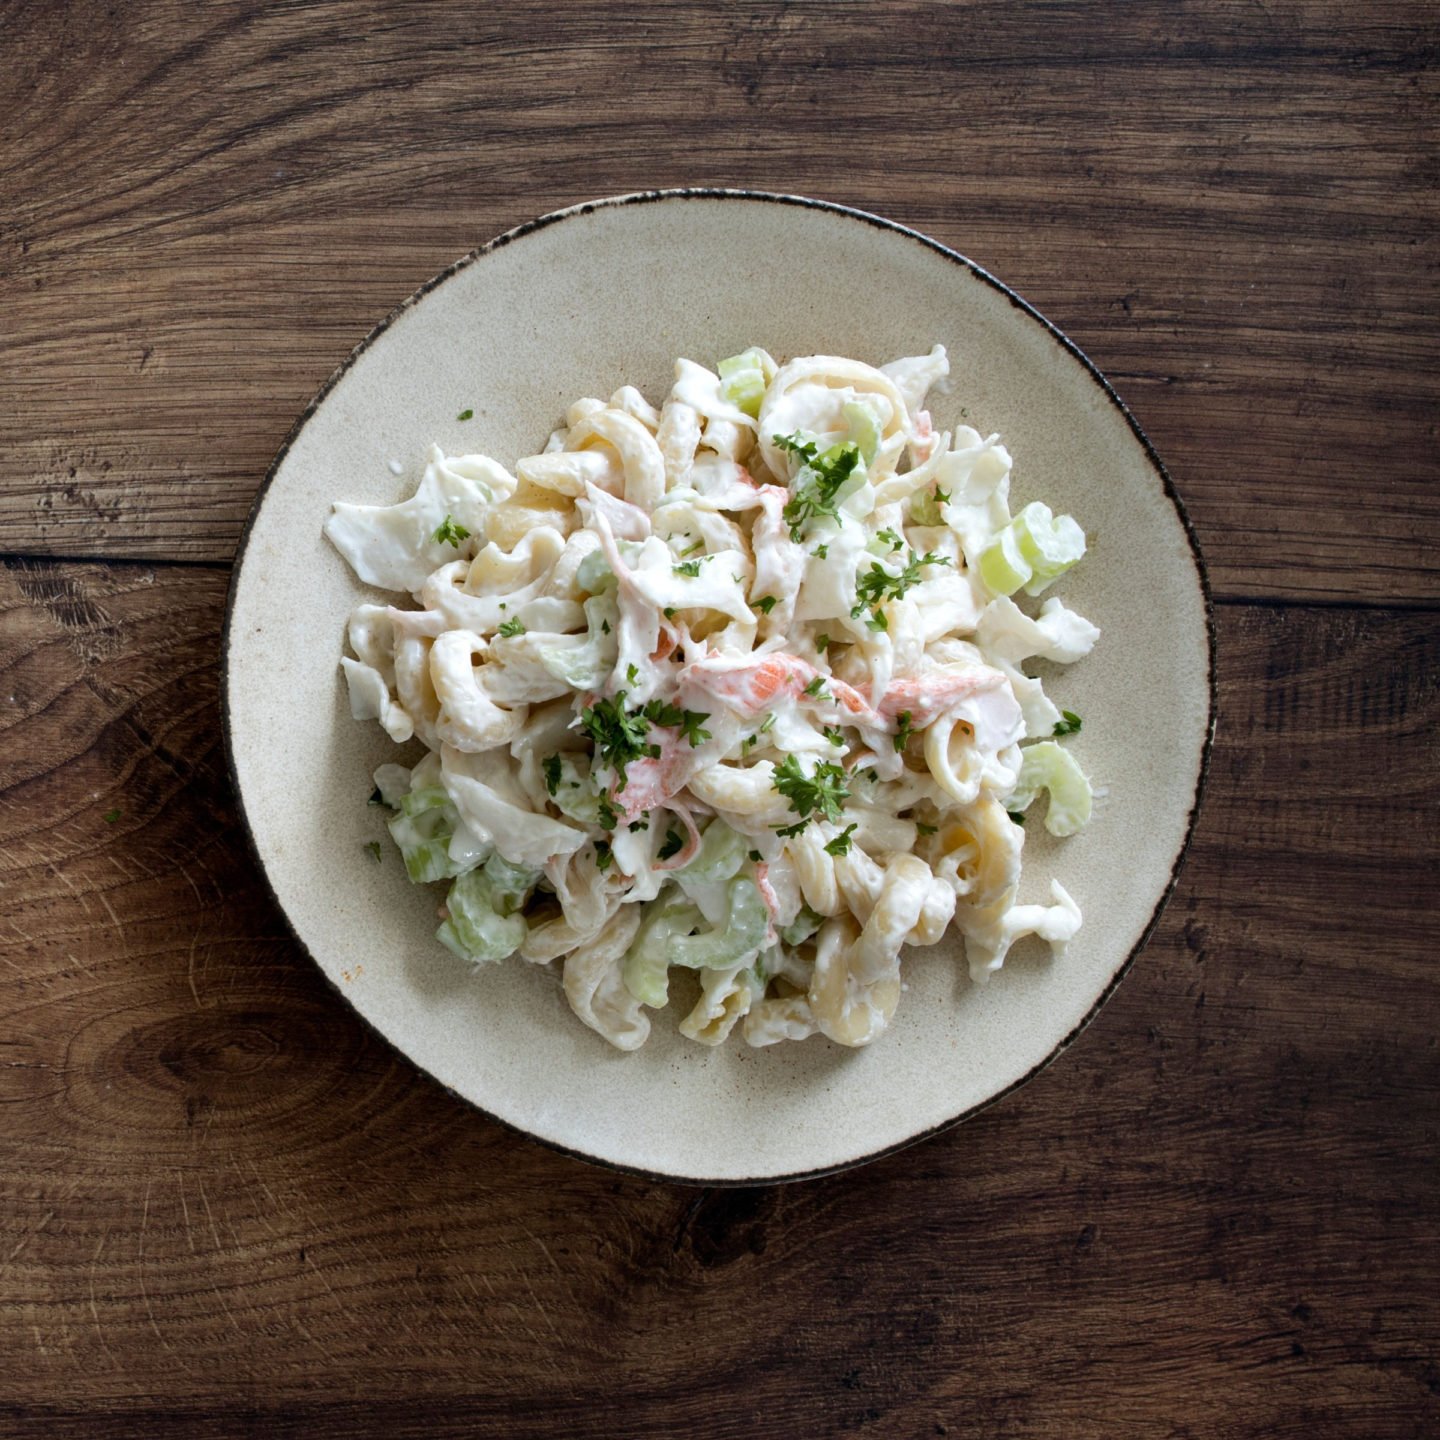 a plate of crab pasta salad on a wooden table